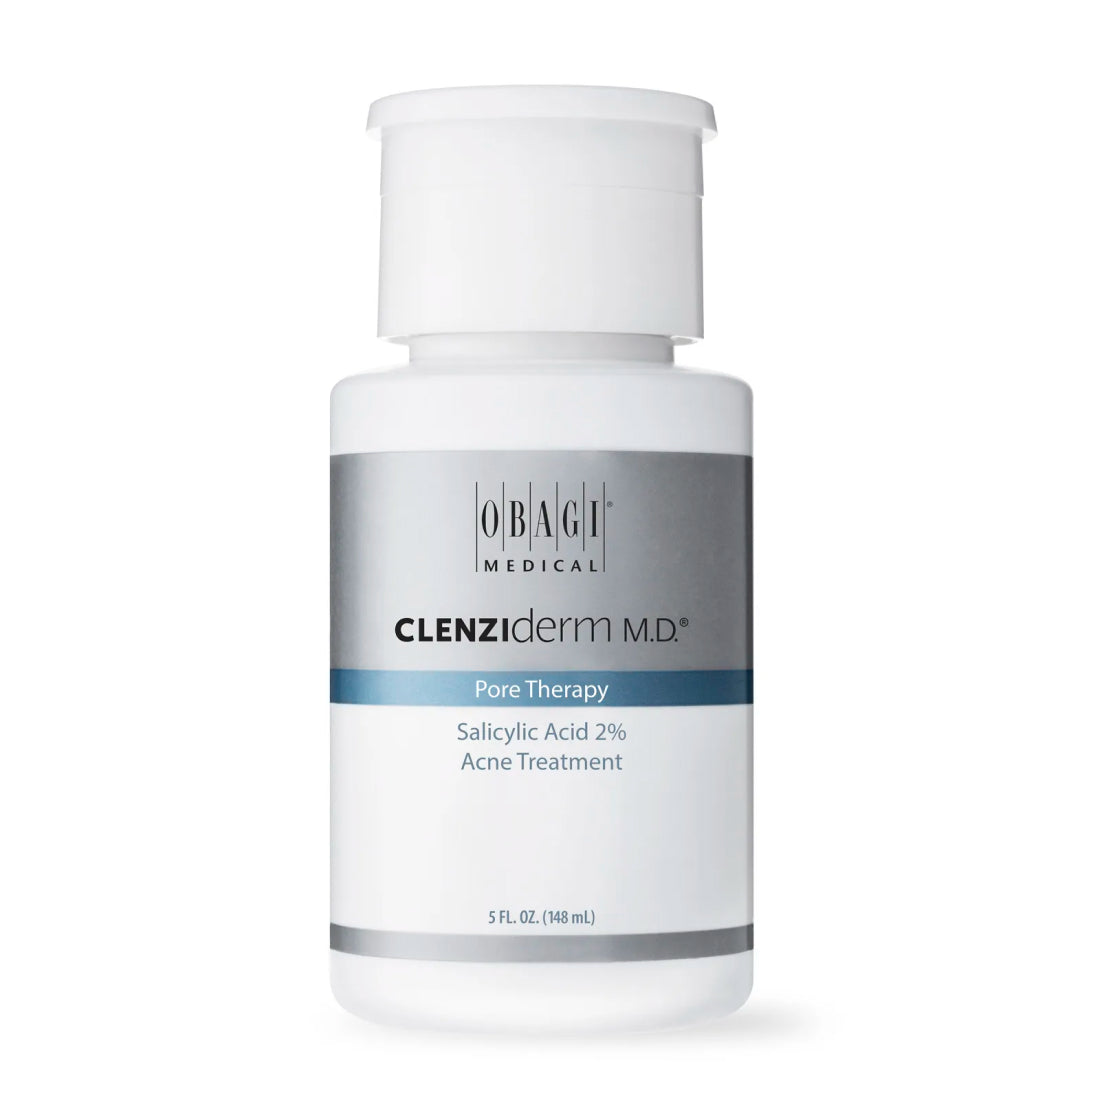 Obagi Medical – Clenziderm Md Pore Therapy